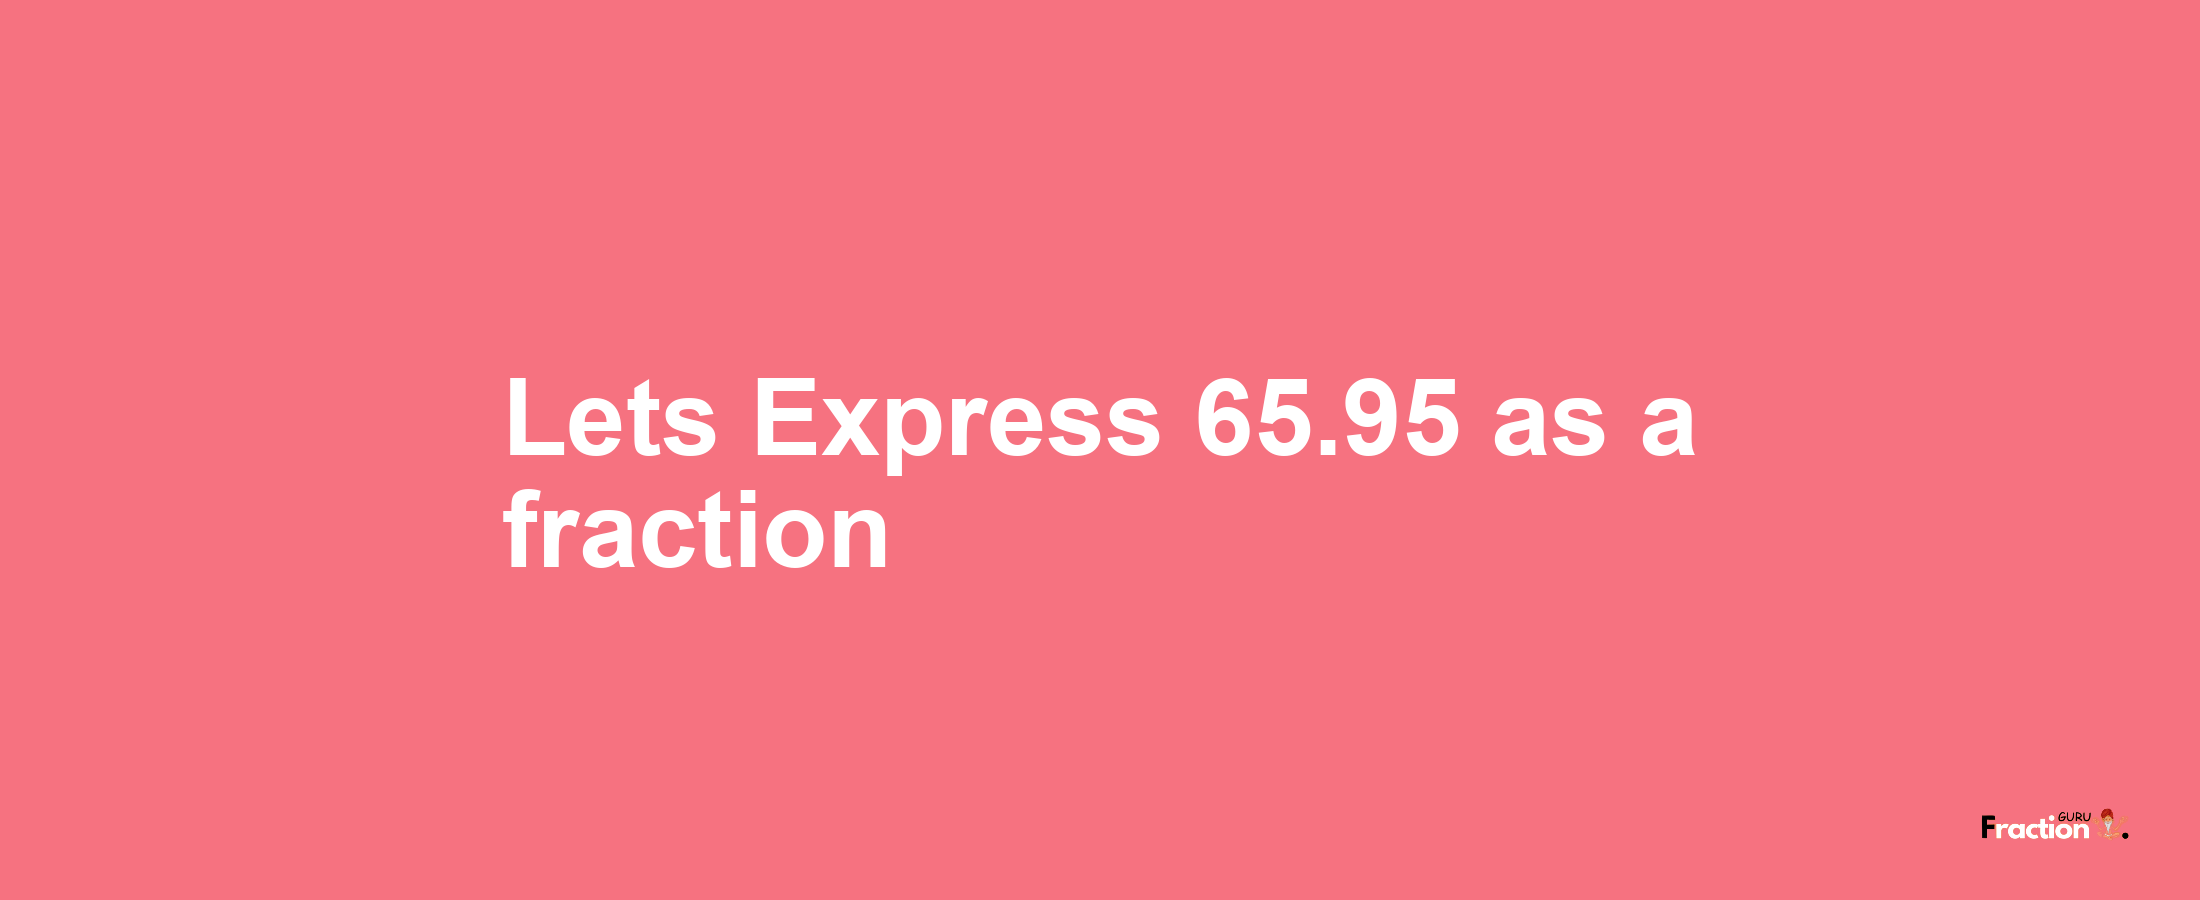 Lets Express 65.95 as afraction